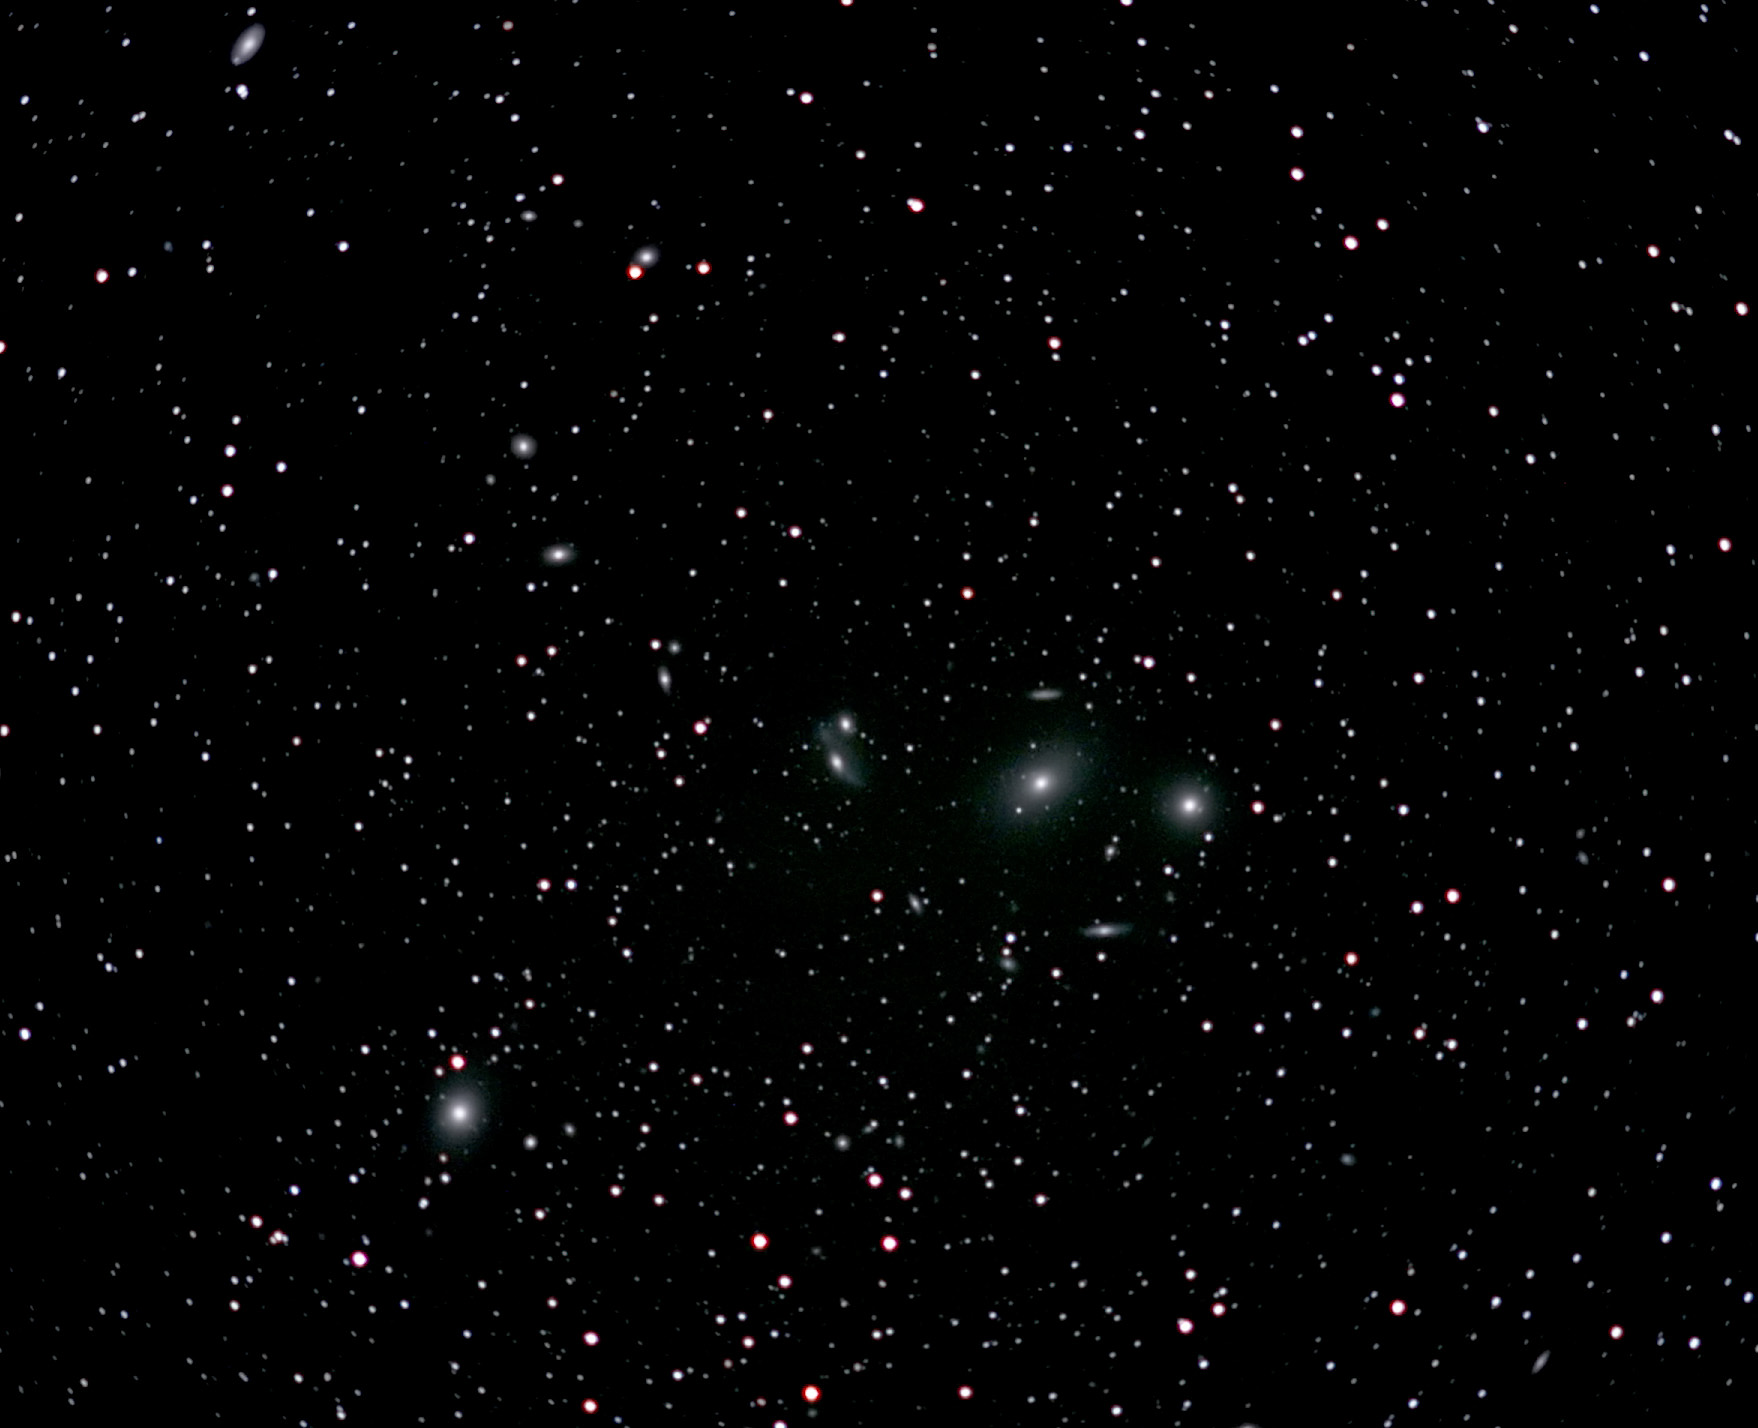 Markarian chain - Large view